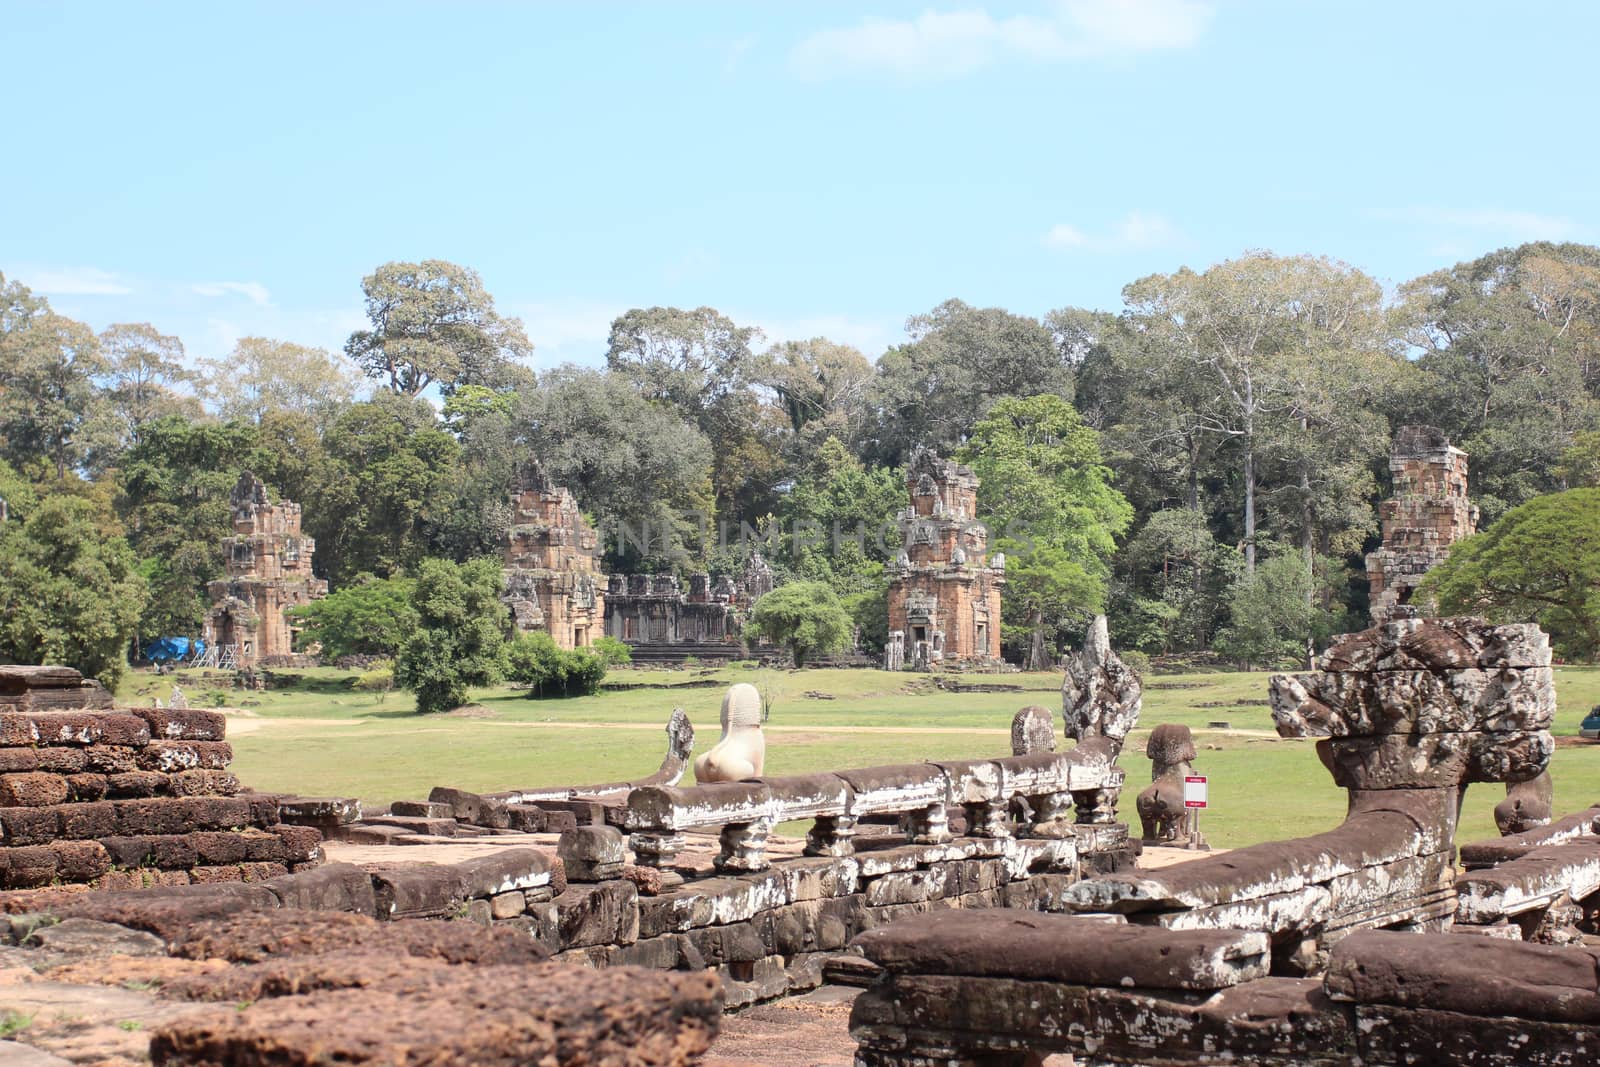 Brick and stone masonry of the ancient walls of the Cambodian temple, with reliefs and sculptures, pillars and columns on a natural background